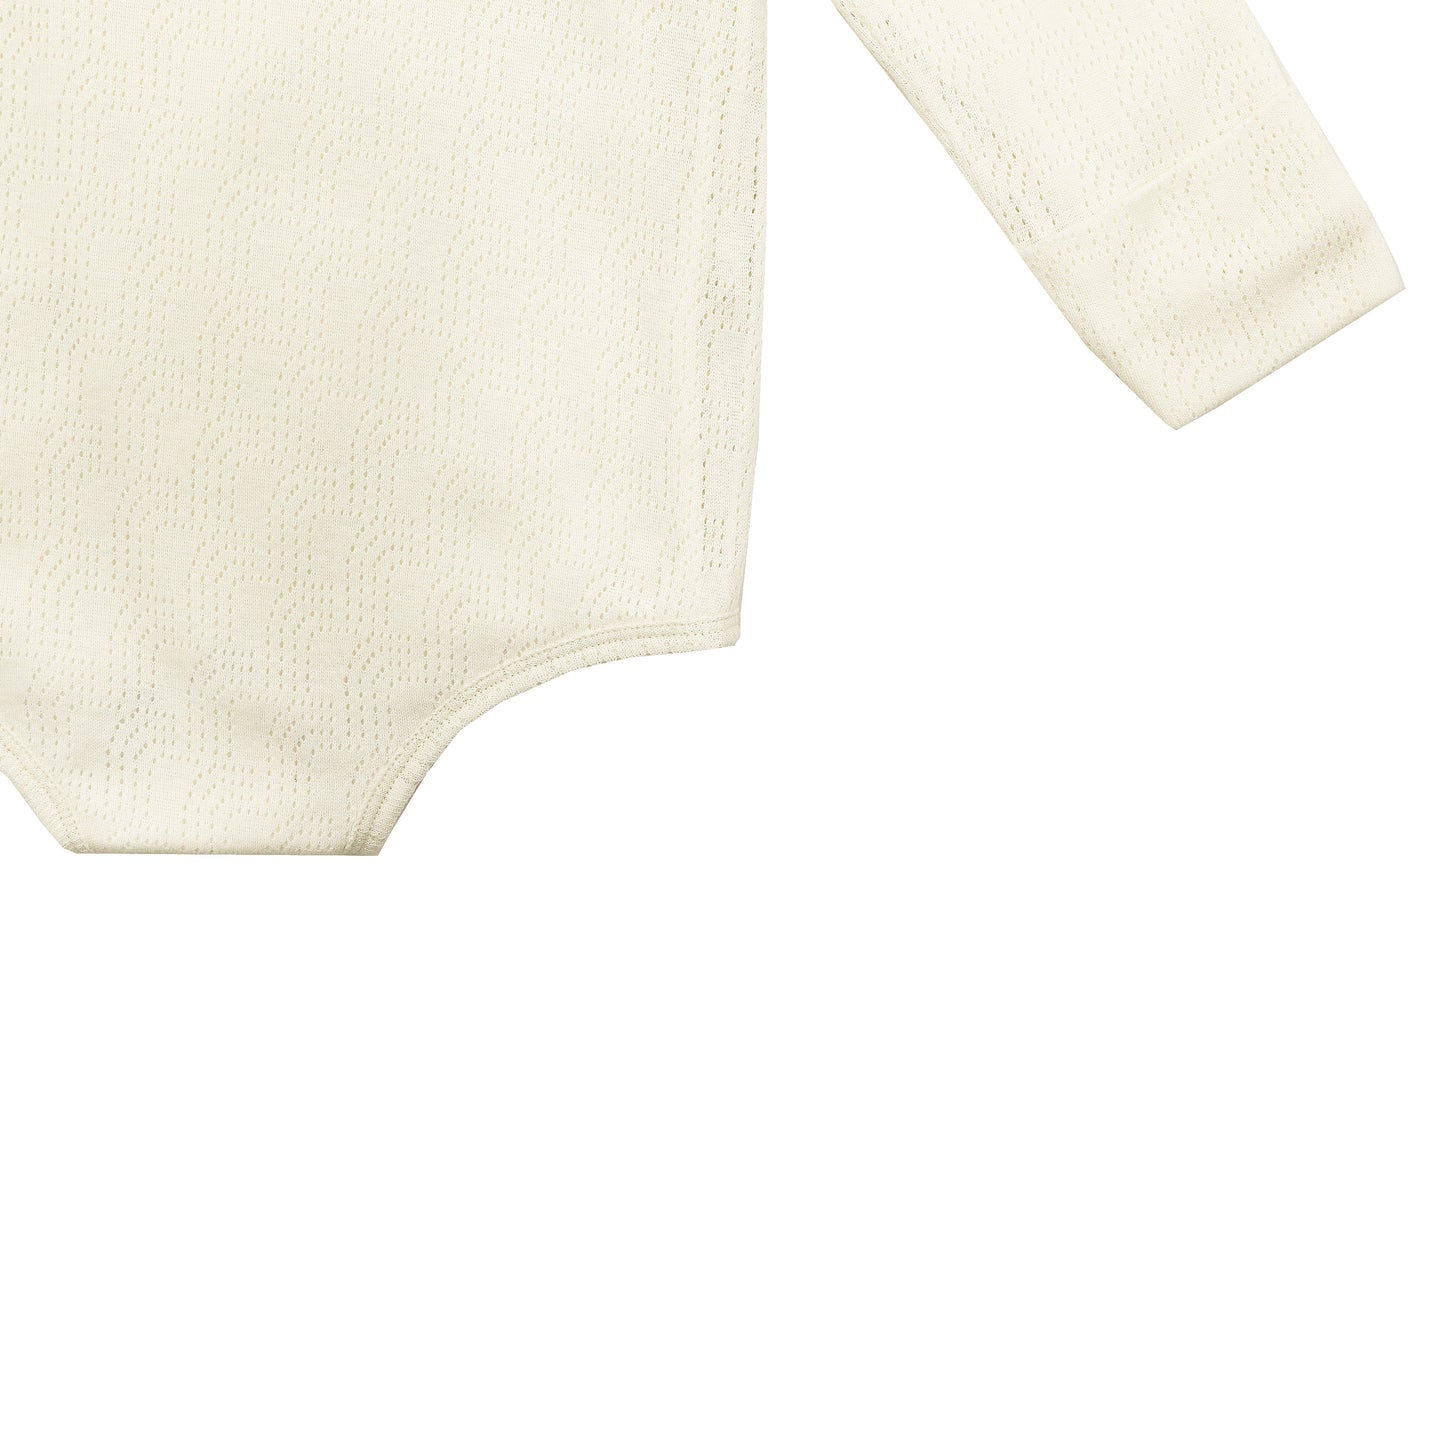 BABY SIGNATURE POINTELLE DOUBLE LAYER LONG-SLEEVE BODY